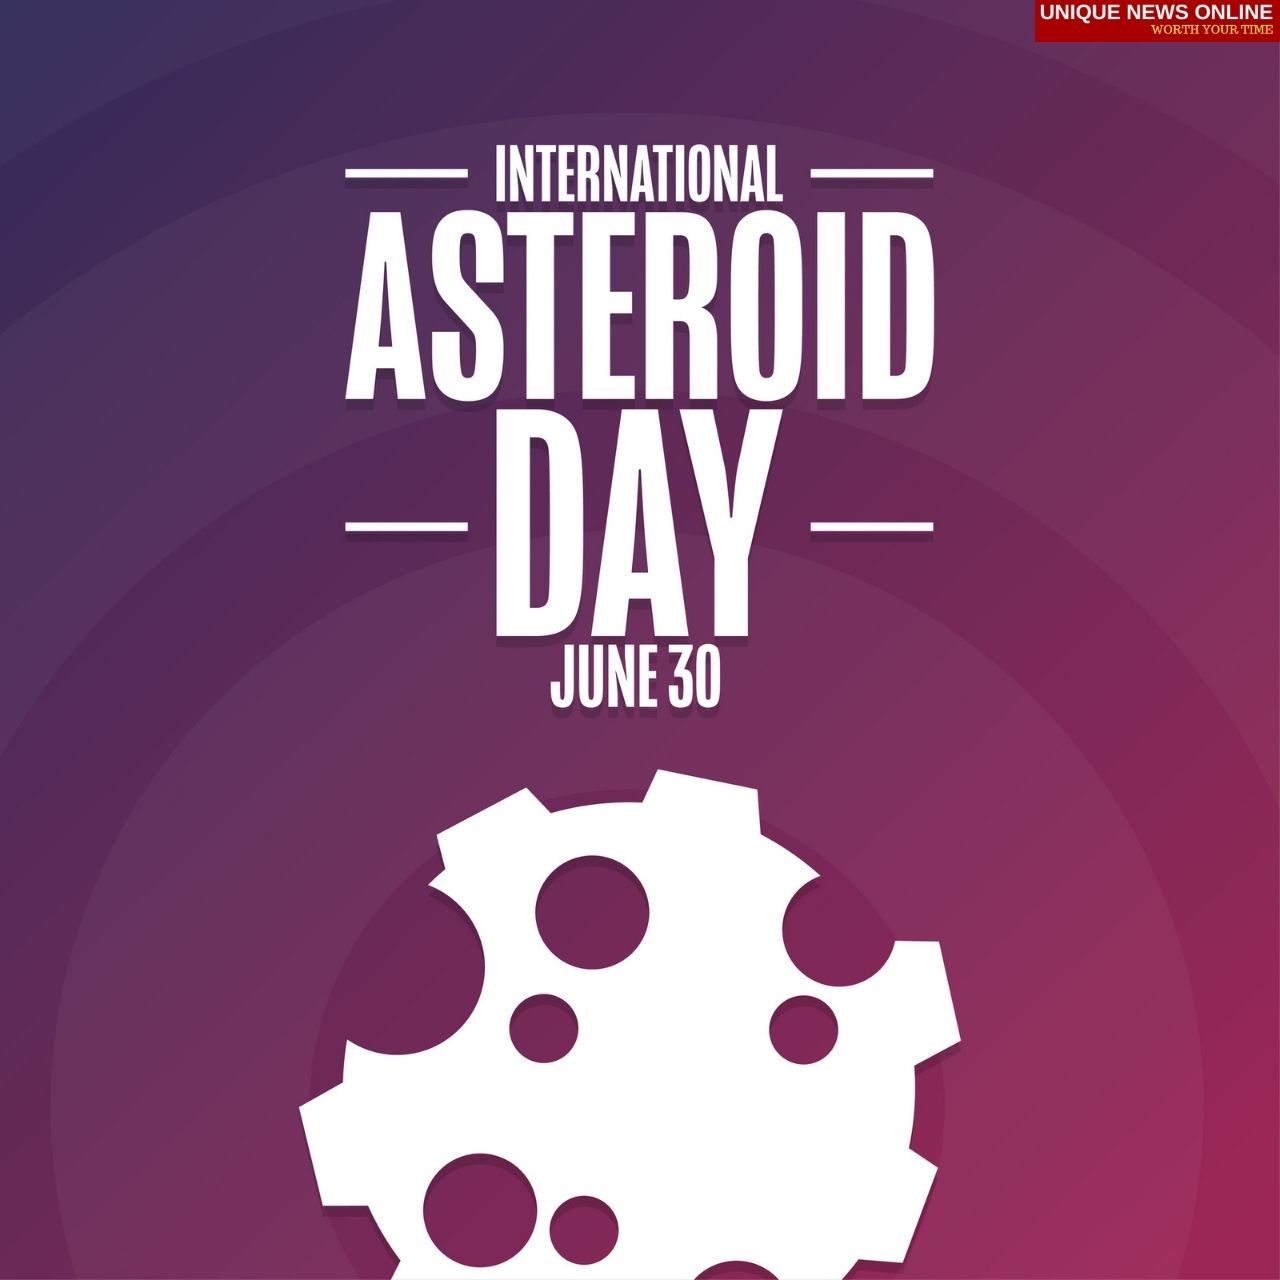 World Asteroid Day 2021 Theme, Poster, Images, and Quotes to Share